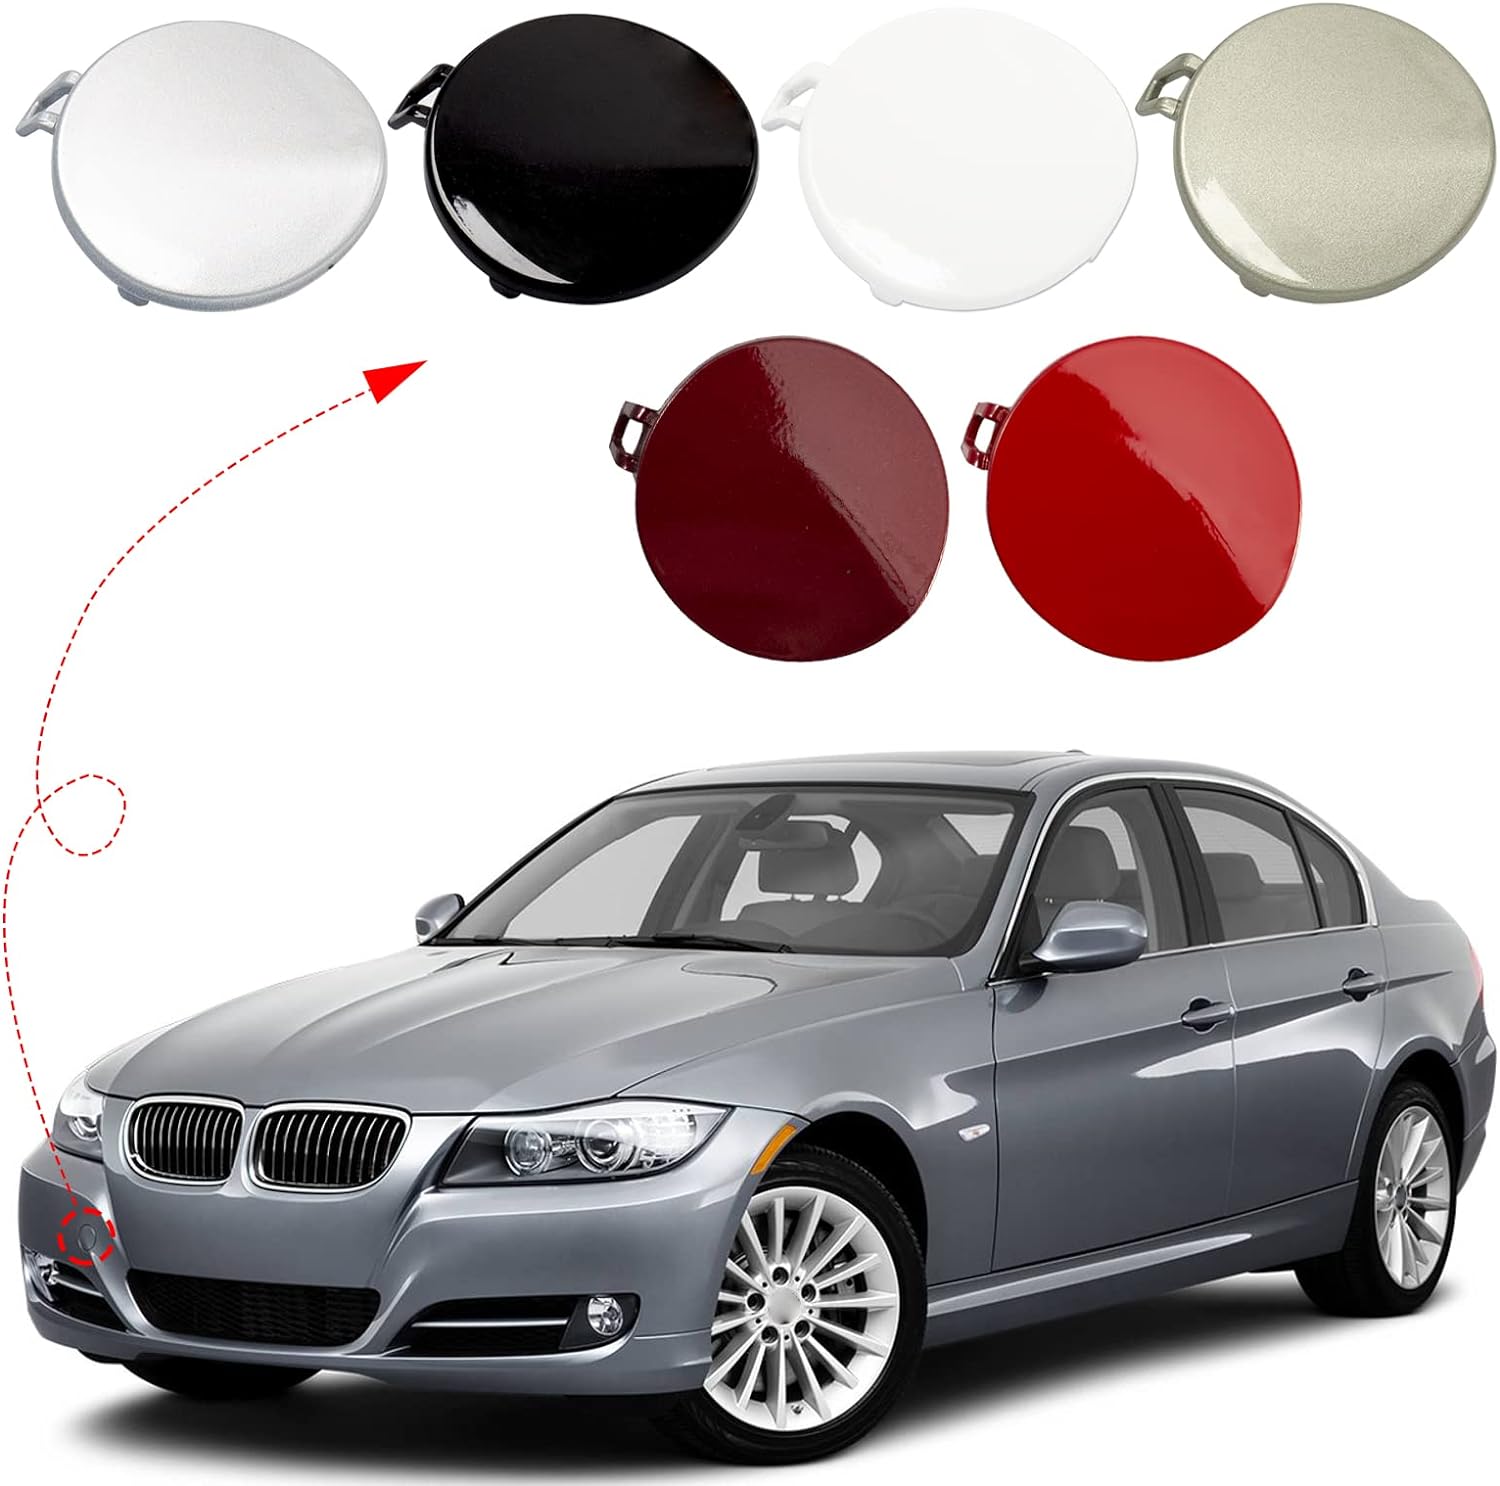 CZShiYue Front Bumper Tow Hook Cover Fit for BMW 3 Series E90 E91 328I 335I 2009 2010 2011 Towing Eye Cap 51117207299 821935A (White, Ri